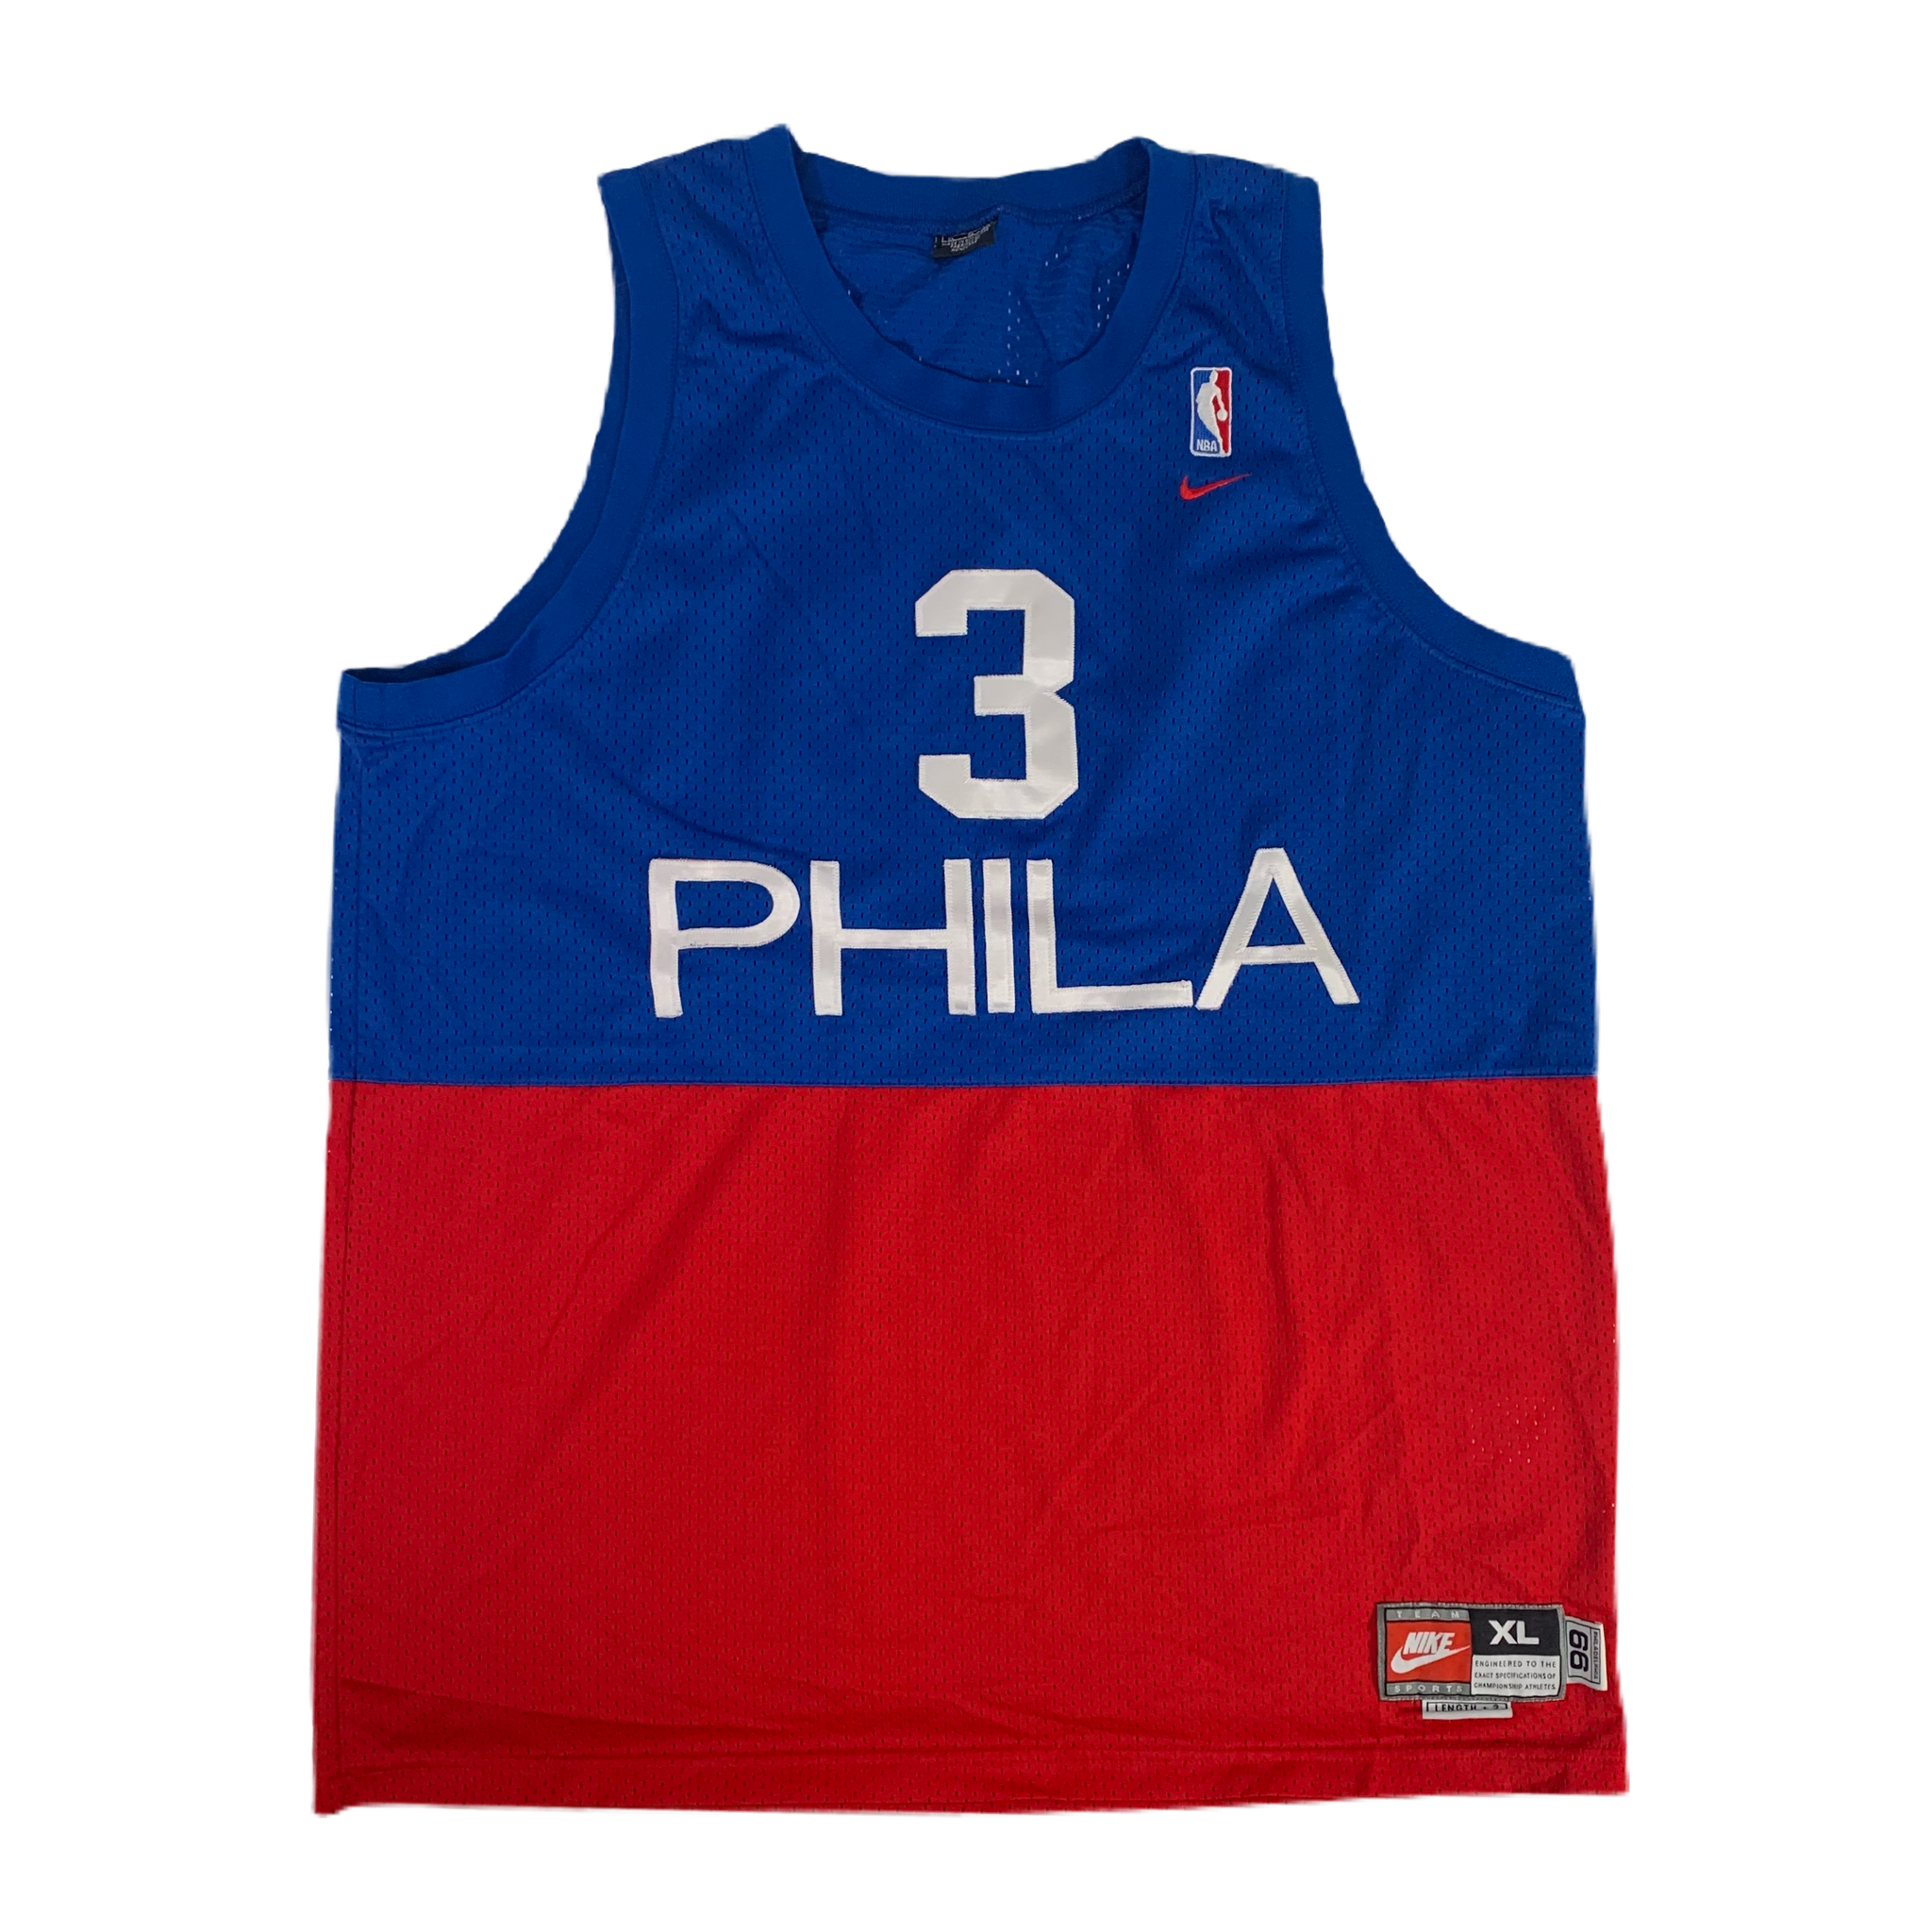 Philly #3 Basketball Jersey